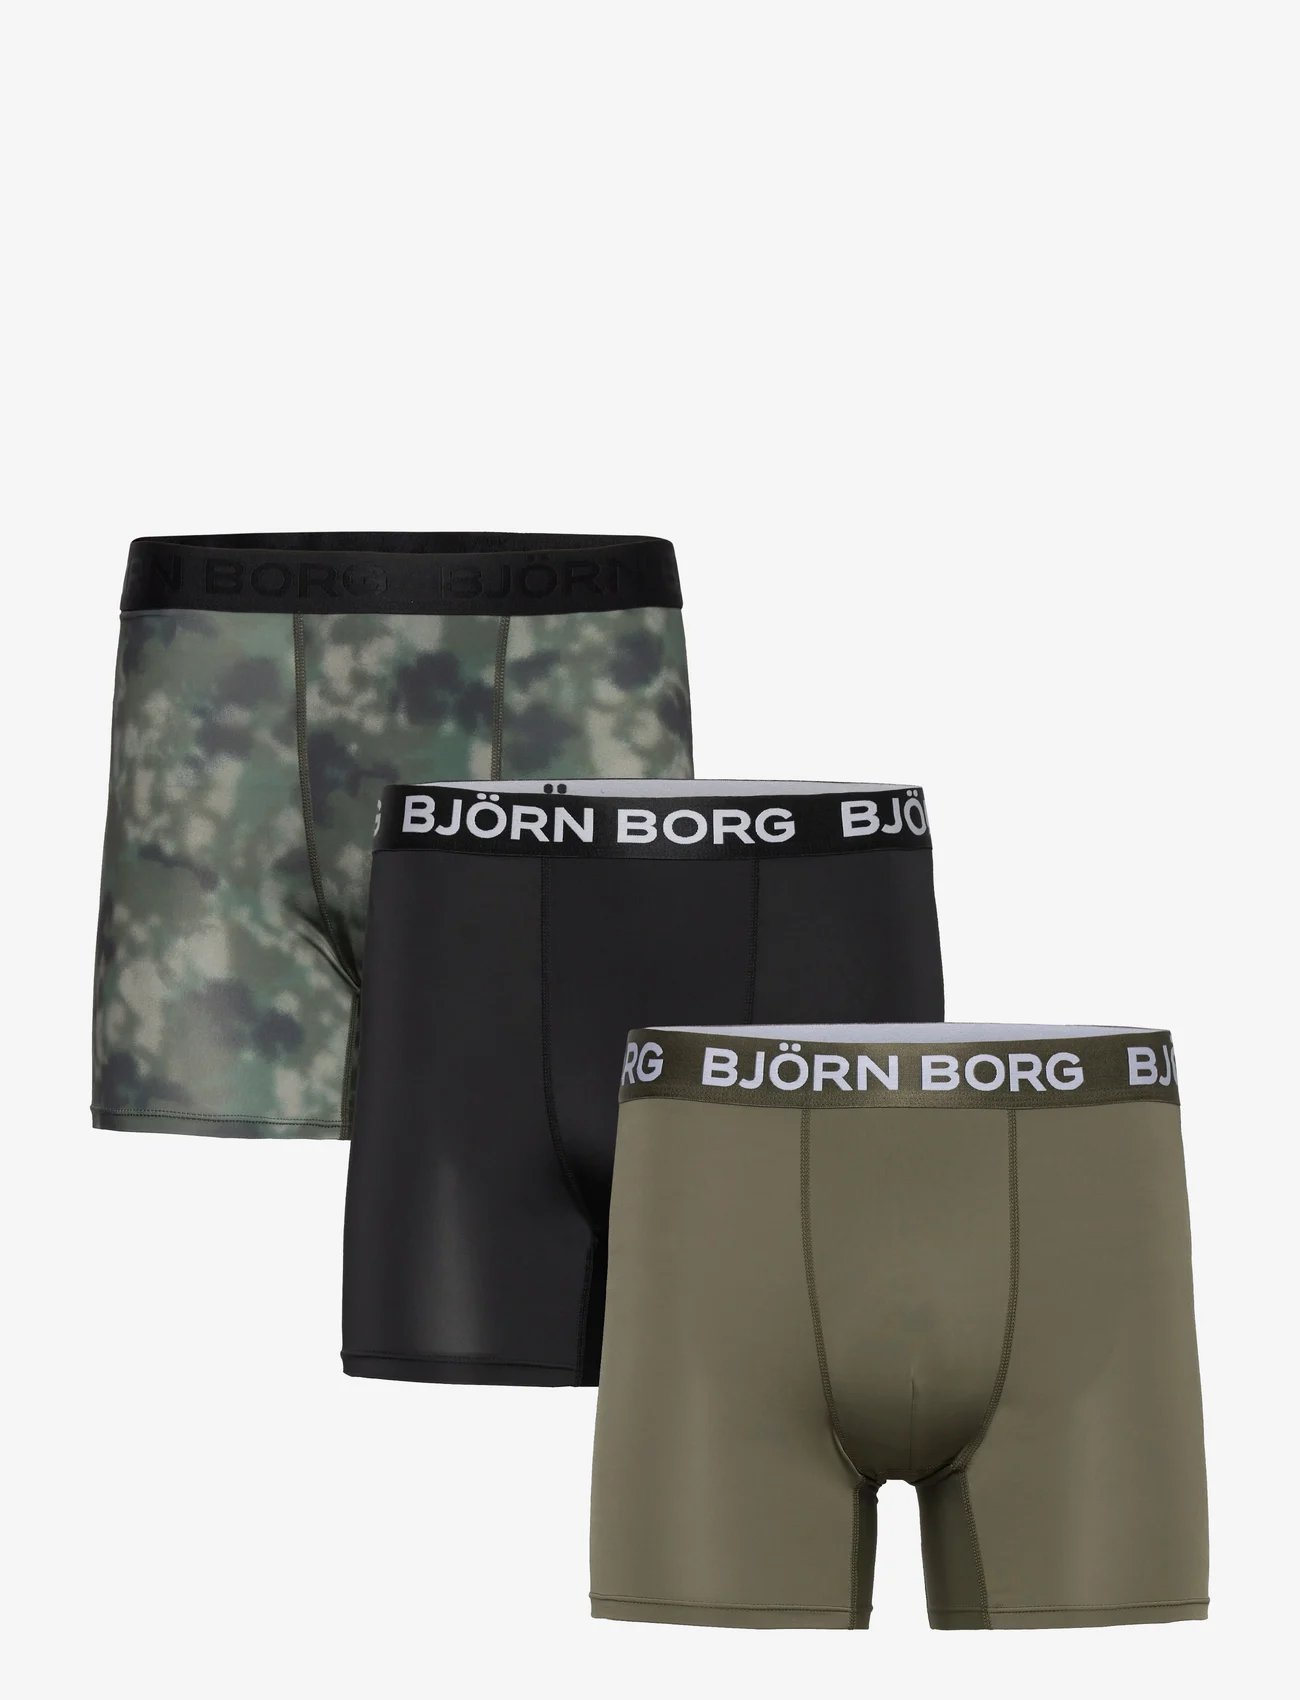 Björn Borg - PERFORMANCE BOXER 3p - nordic style - multipack 2 - 0